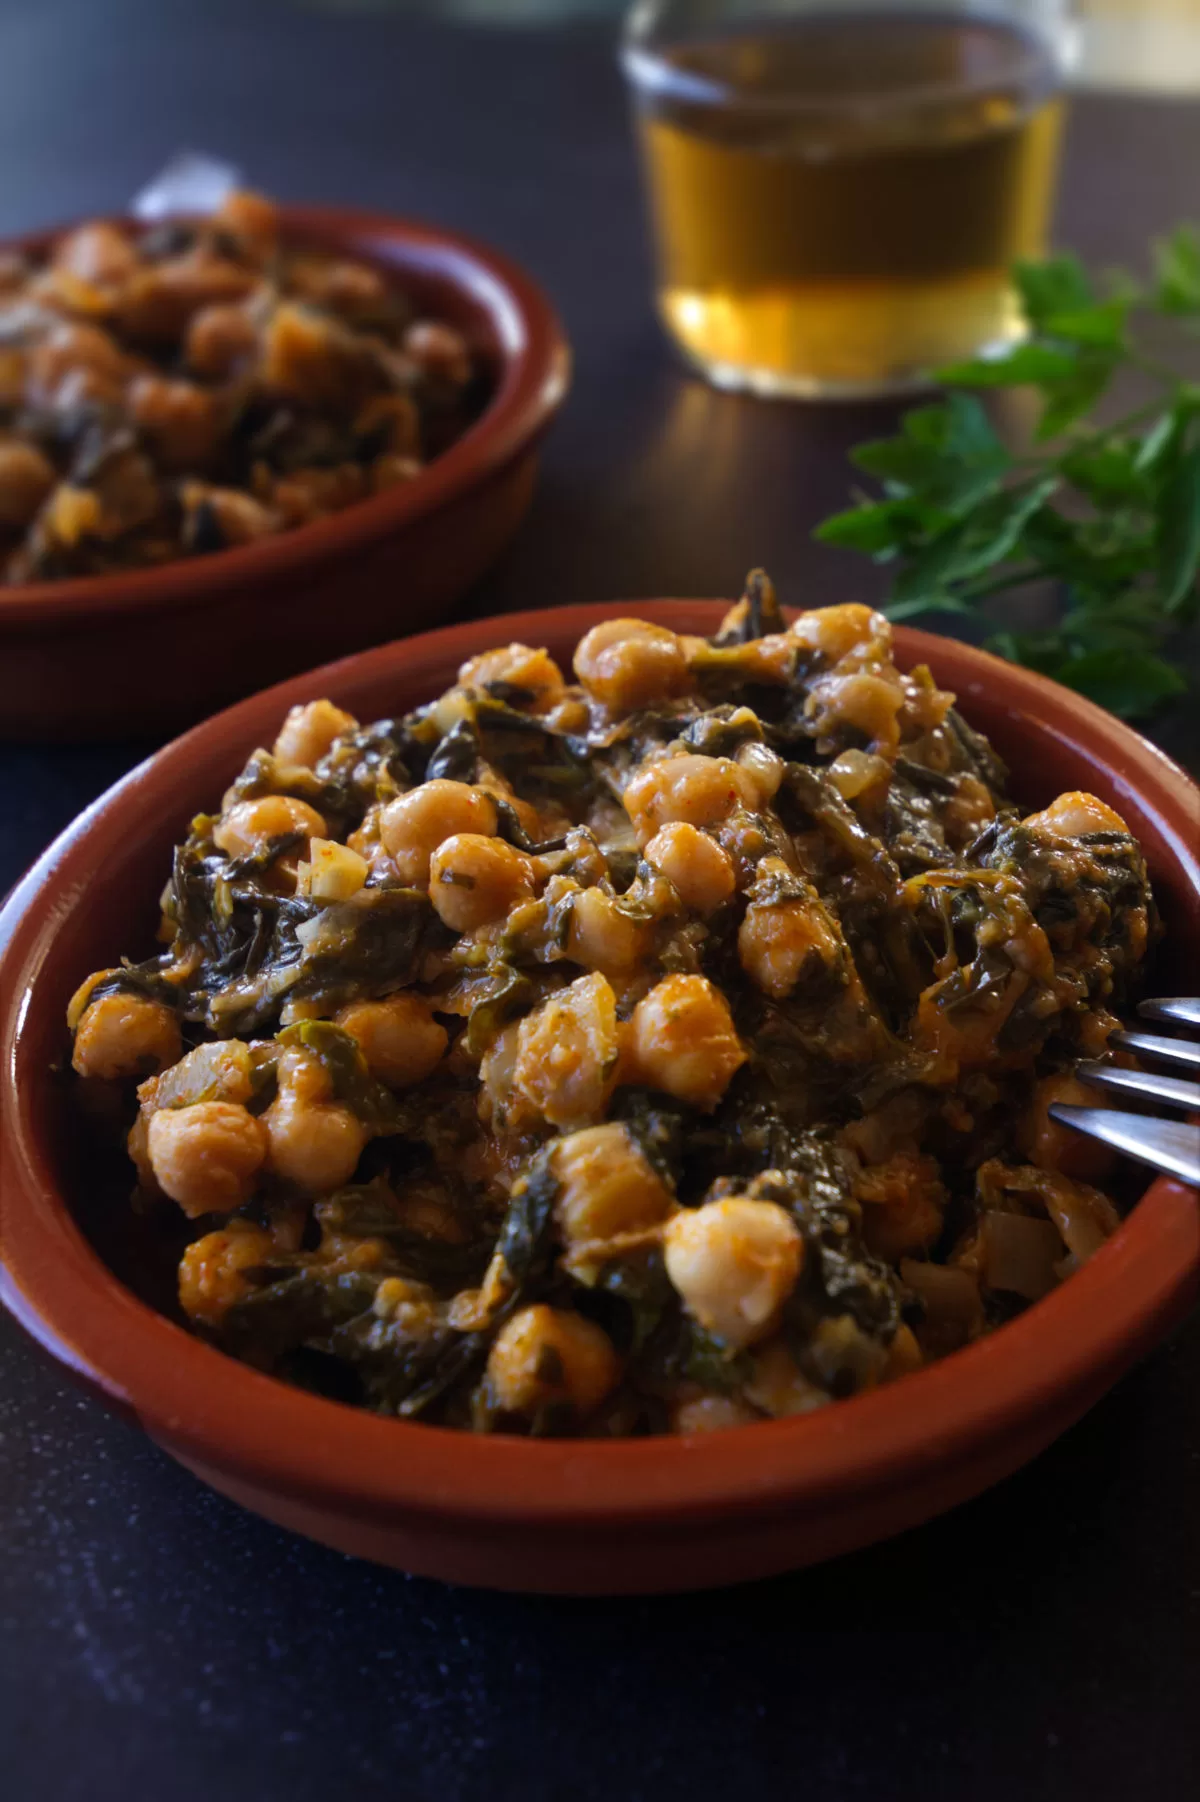 A small tapas serving of Spinach with chickpeas sits on a table beside a small glass of beer.